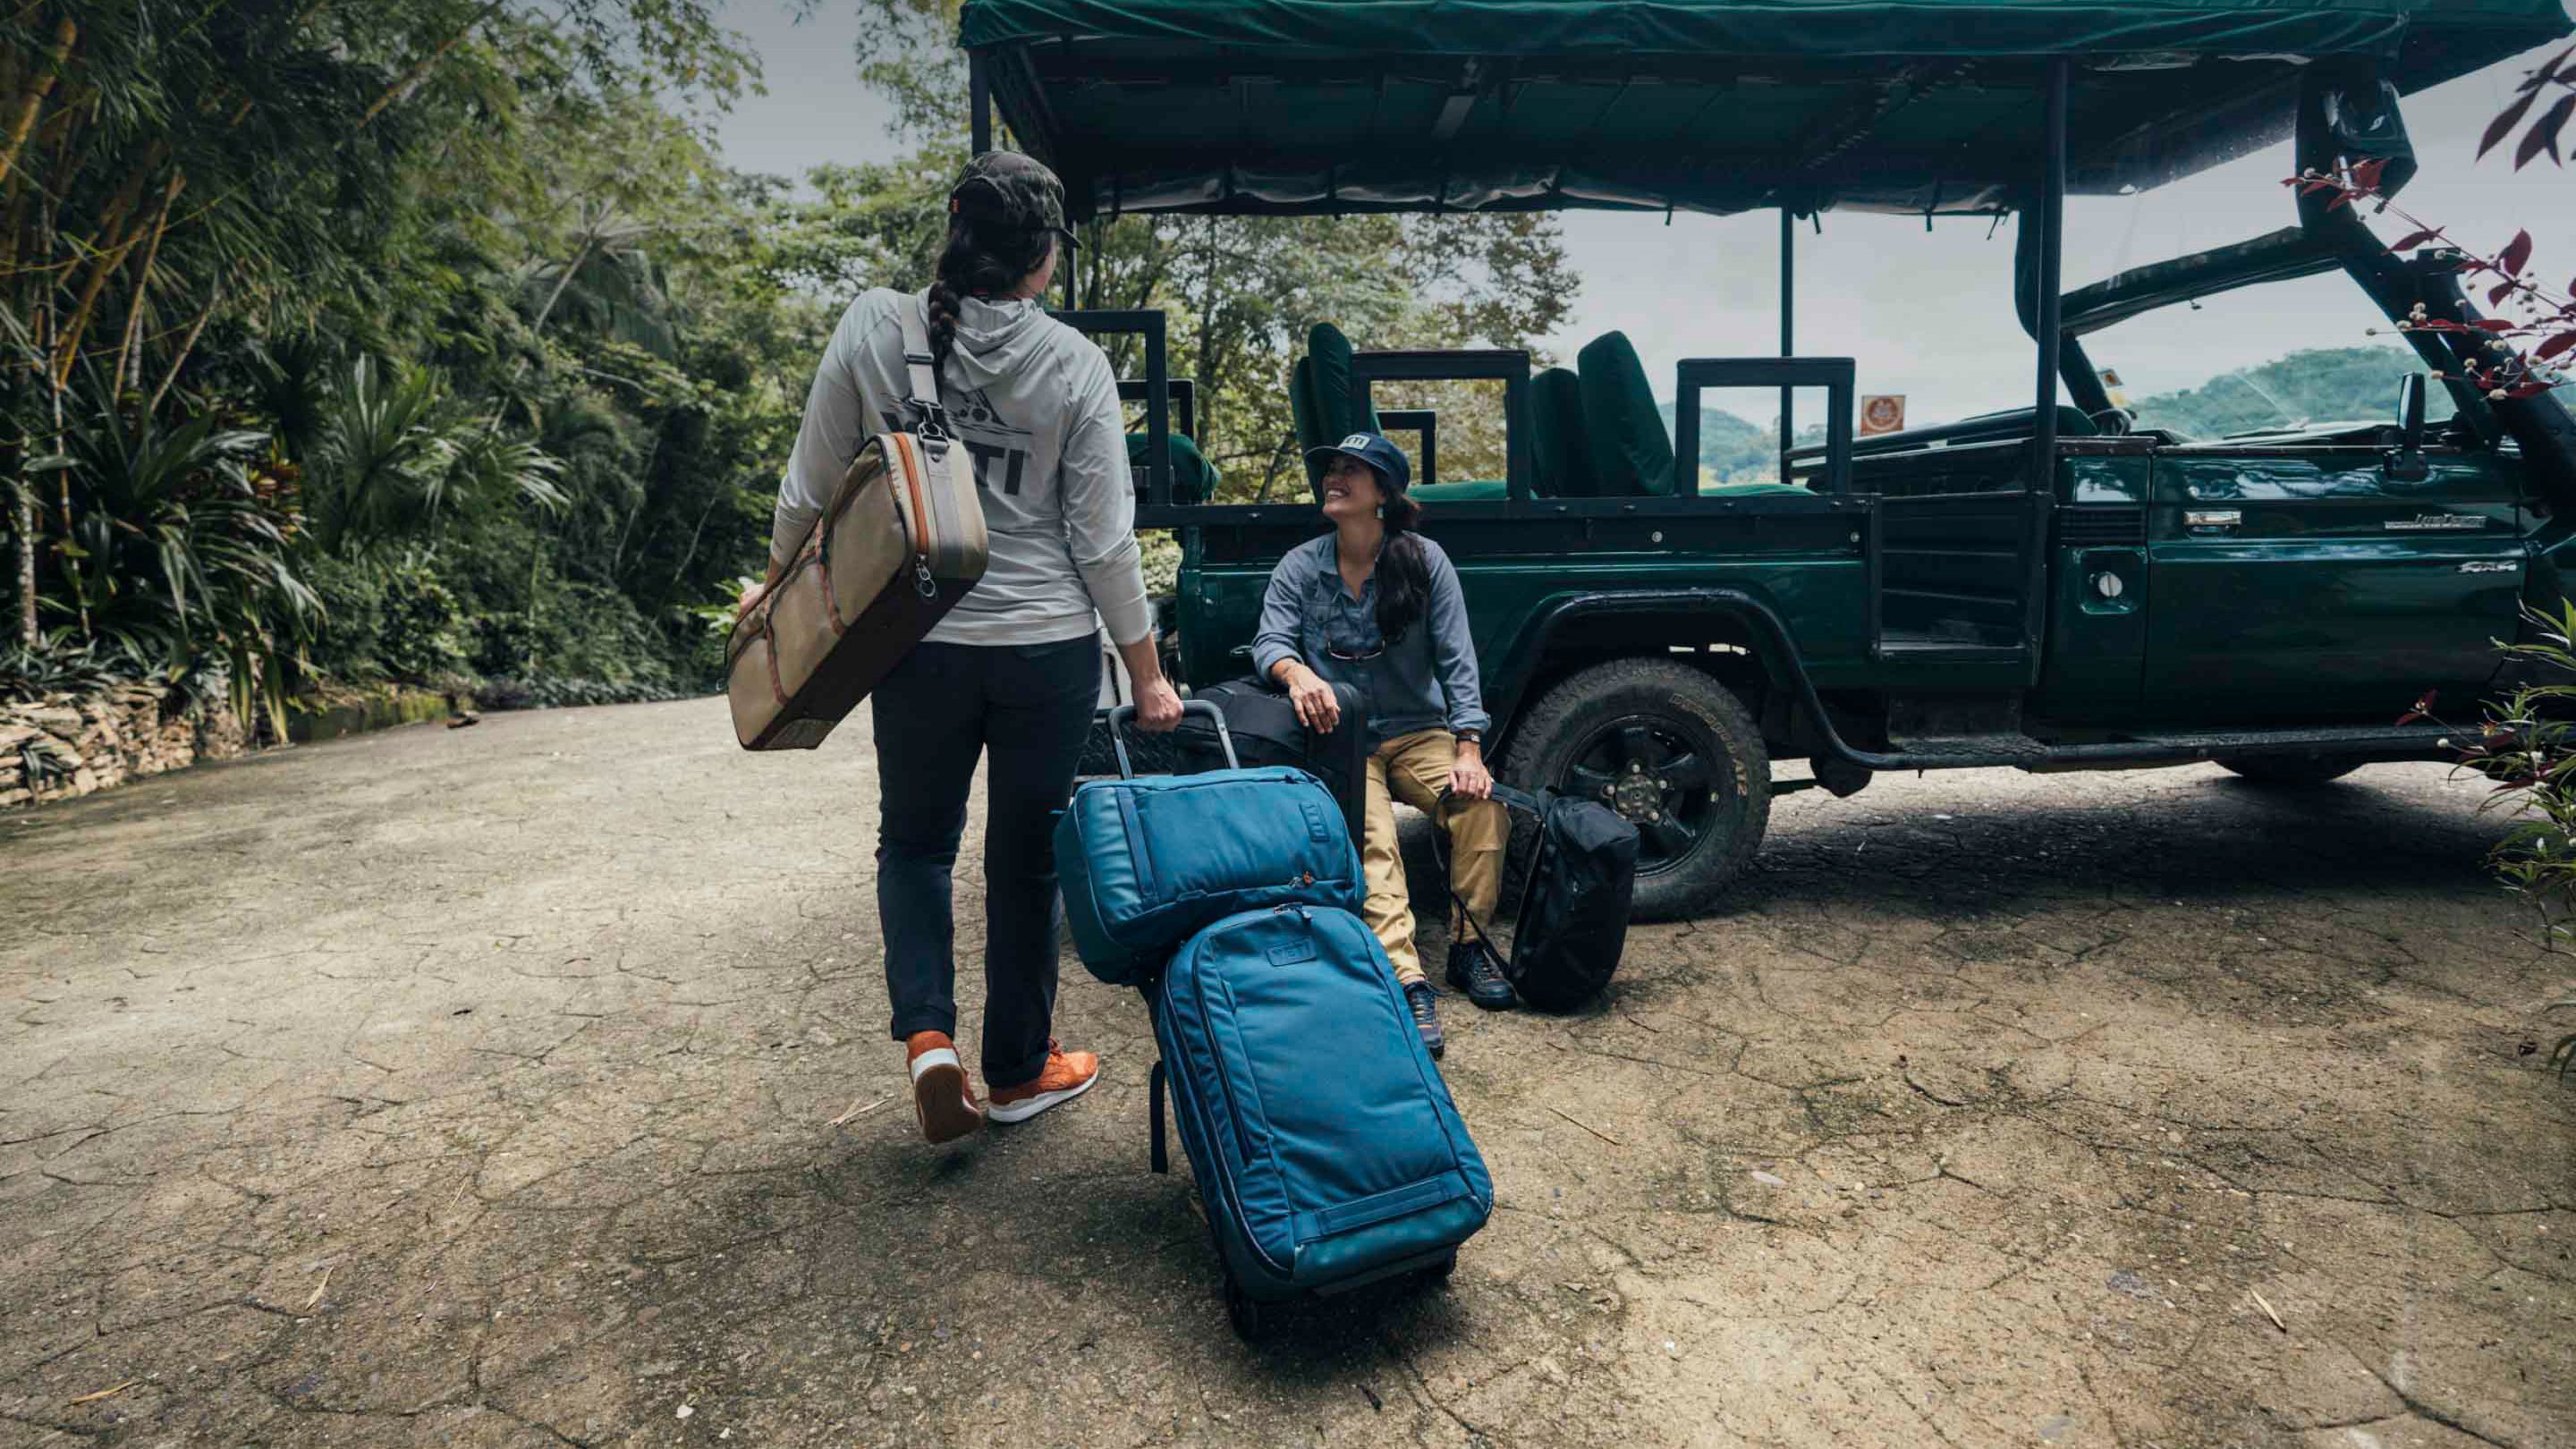 Yeti Luggage: The Brand's Ultra-Durable Collection Has Backpacks